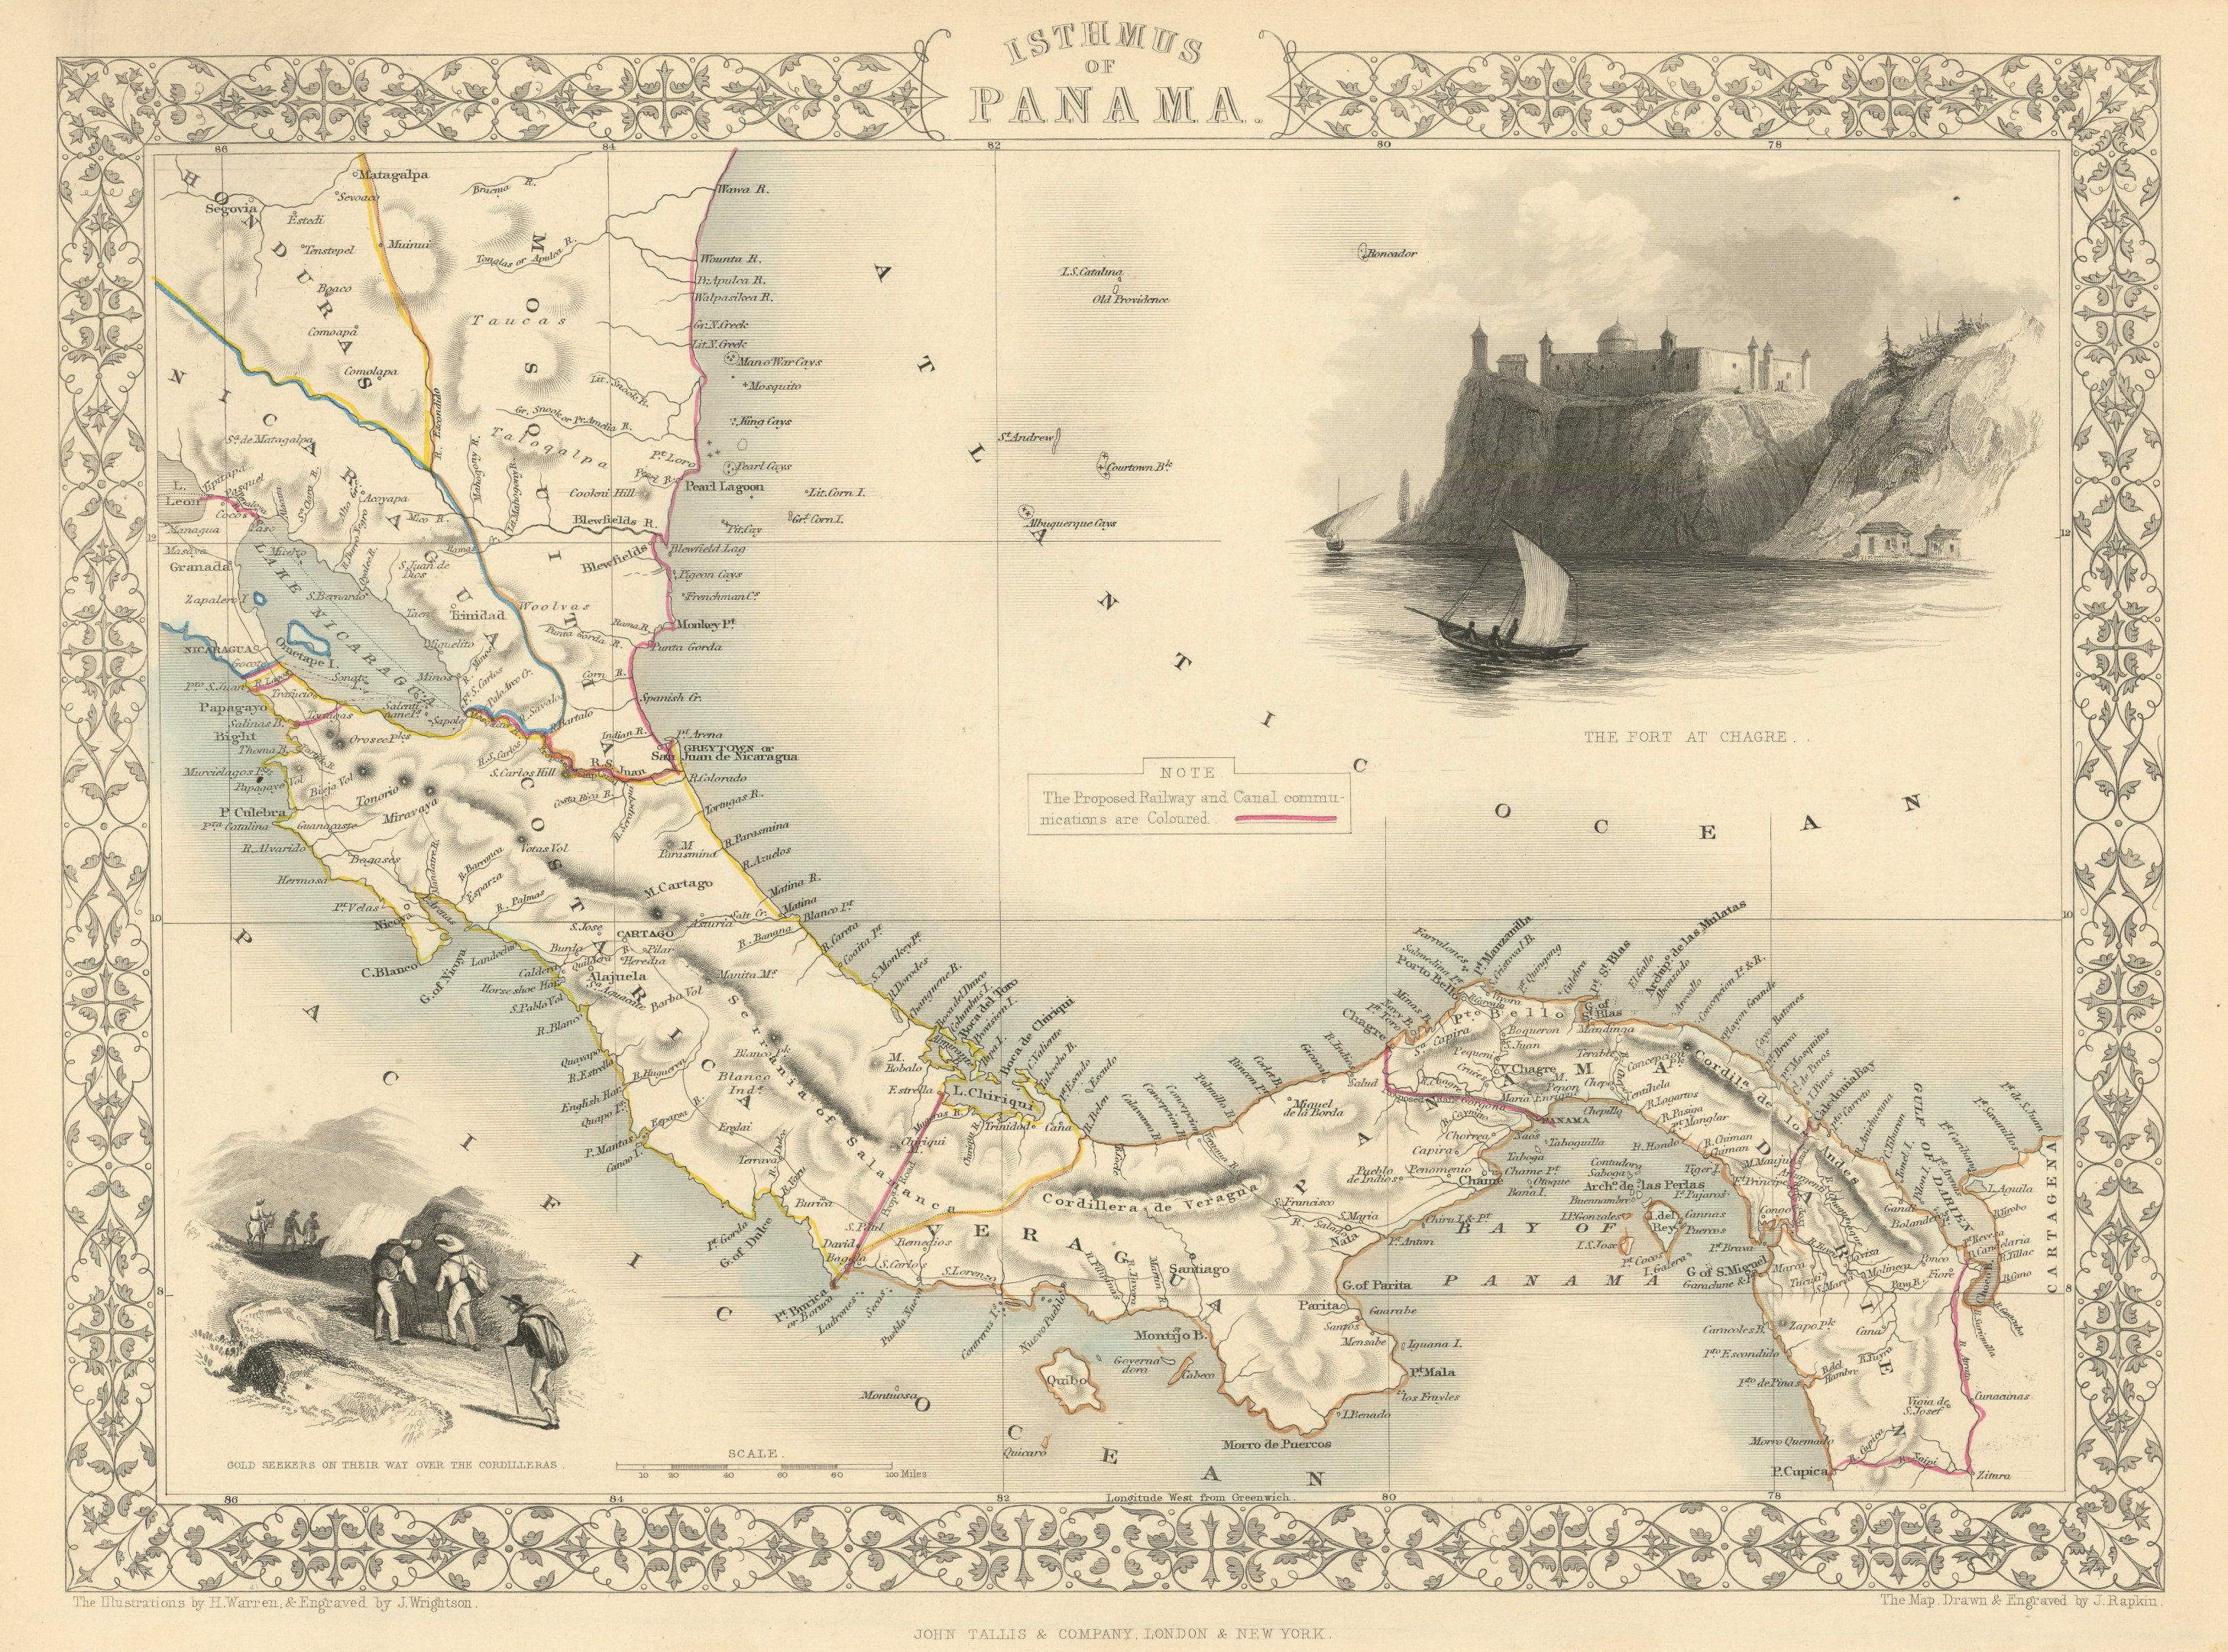 Associate Product PANAMA ISTHMUS shows 7 proposed canal, rail & road routes RAPKIN/TALLIS 1851 map